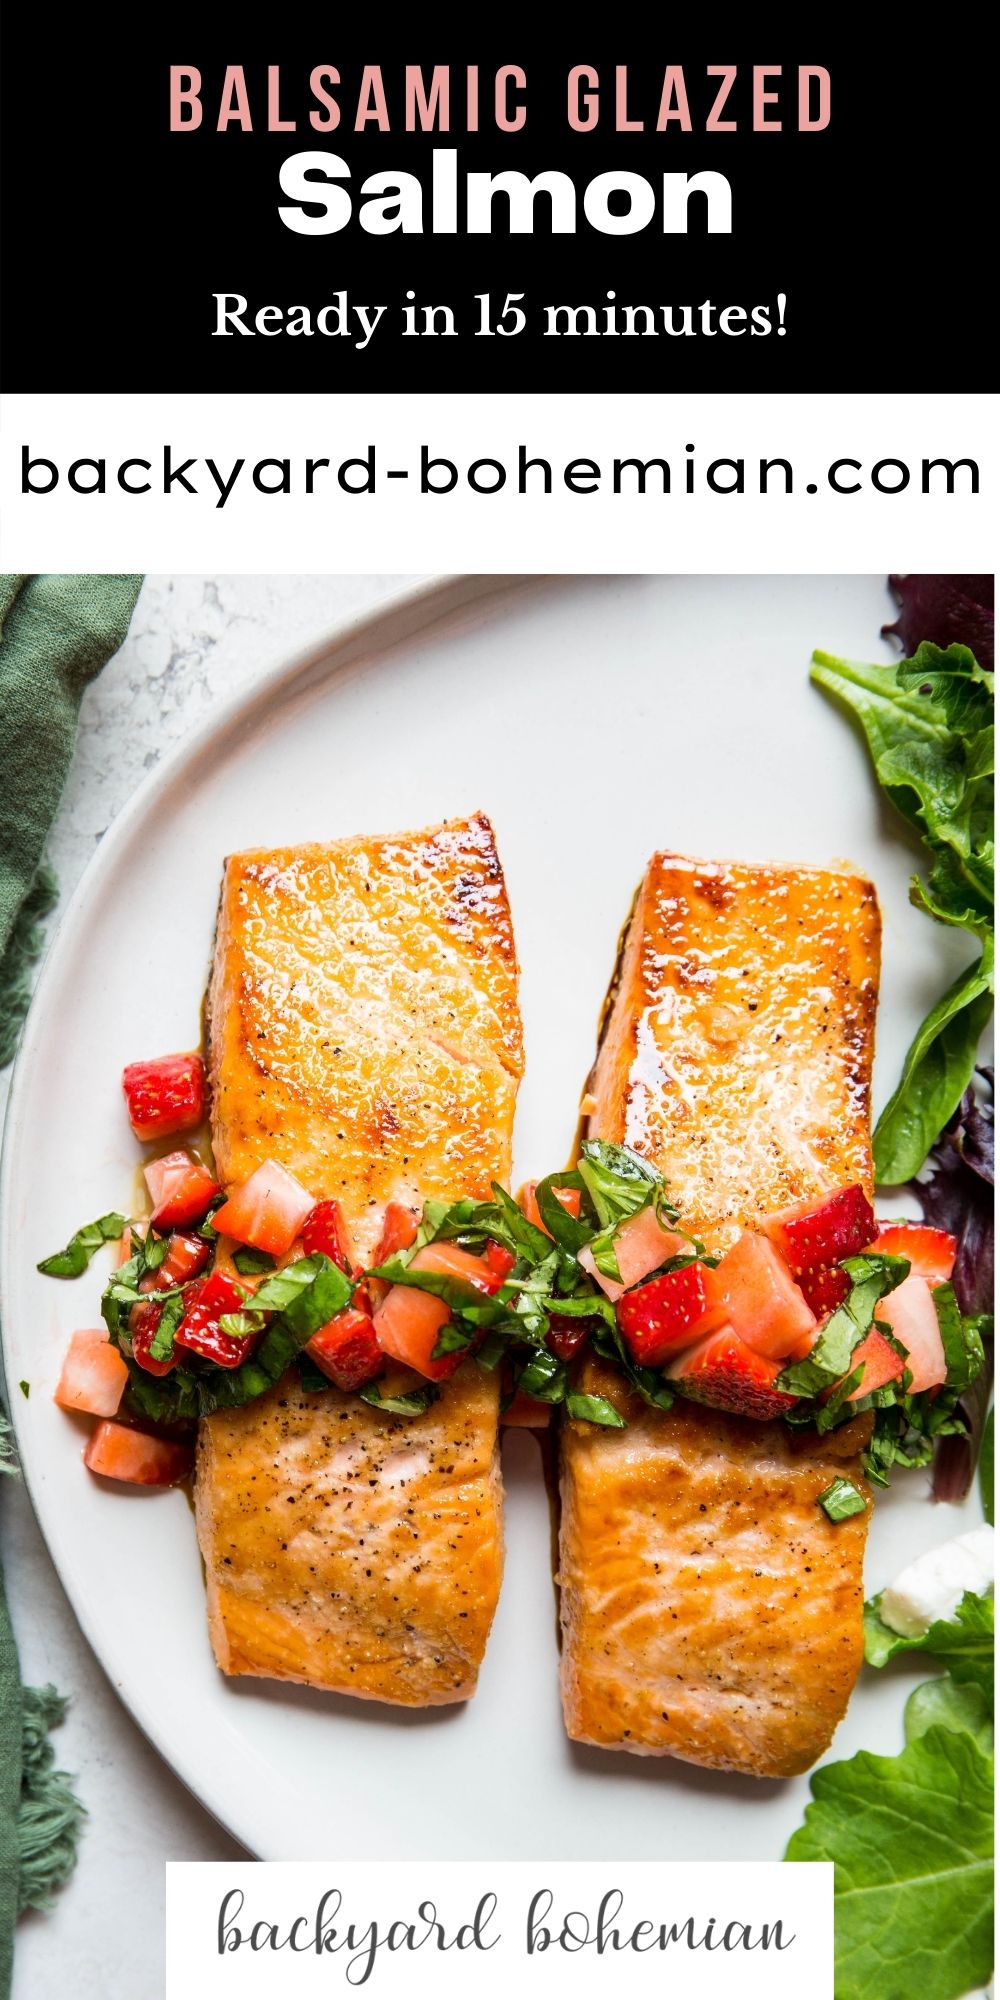 Honey Balsamic Glazed Salmon With Strawberry Relish is packed with fresh flavors and is such an easy 30 minute meal! The salmon filets are perfectly seared to juicy, tender perfection. This easy salmon recipe will have you hooked!